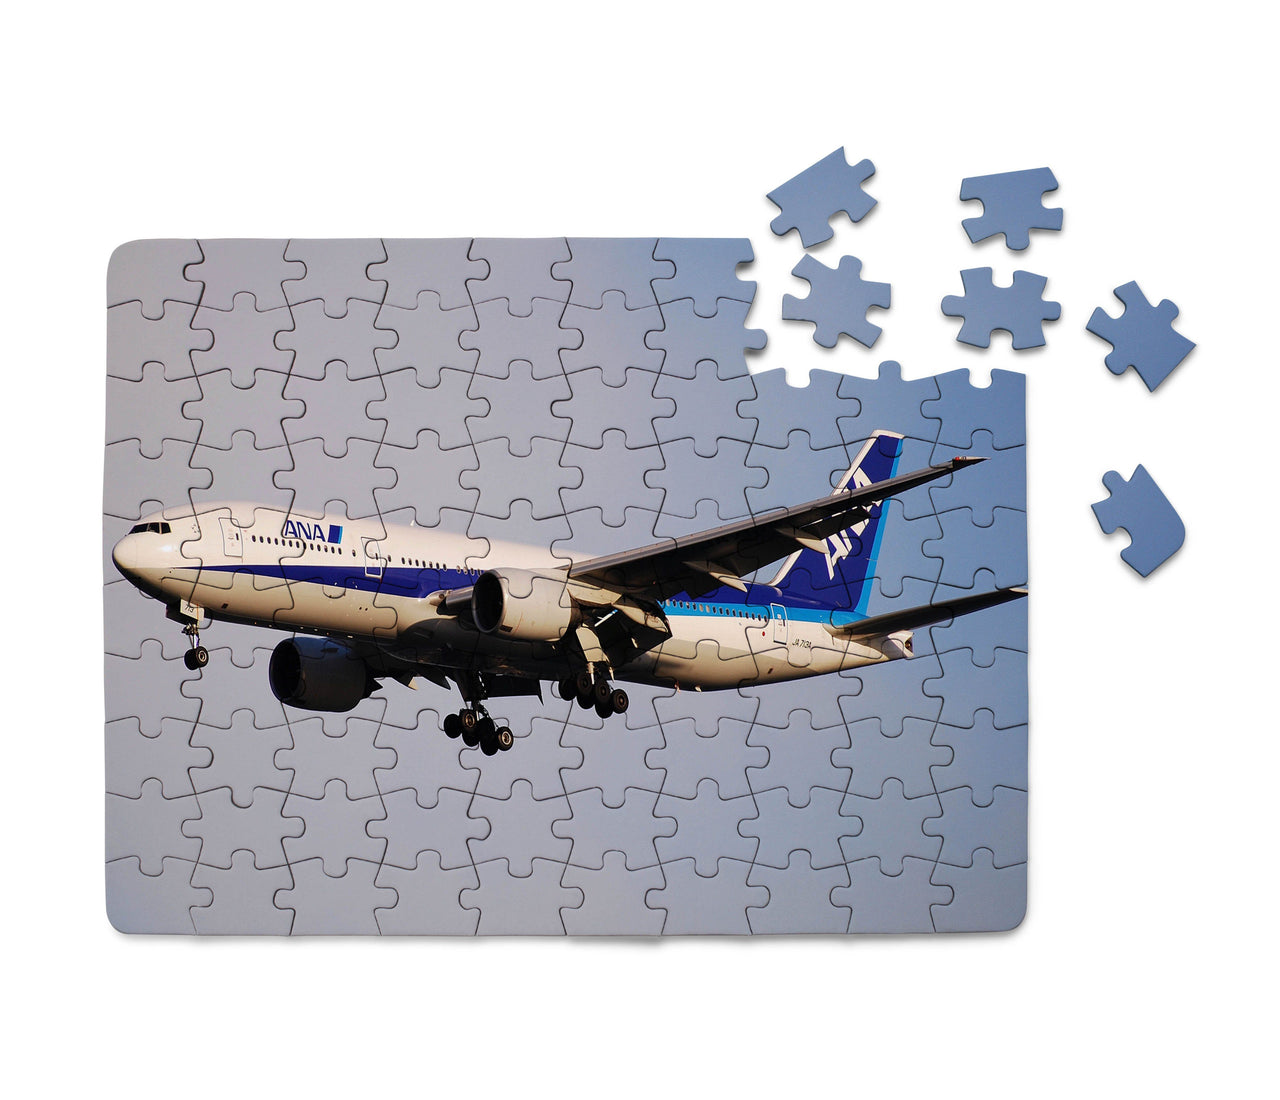 ANA's Boeing 777 Printed Puzzles Aviation Shop 